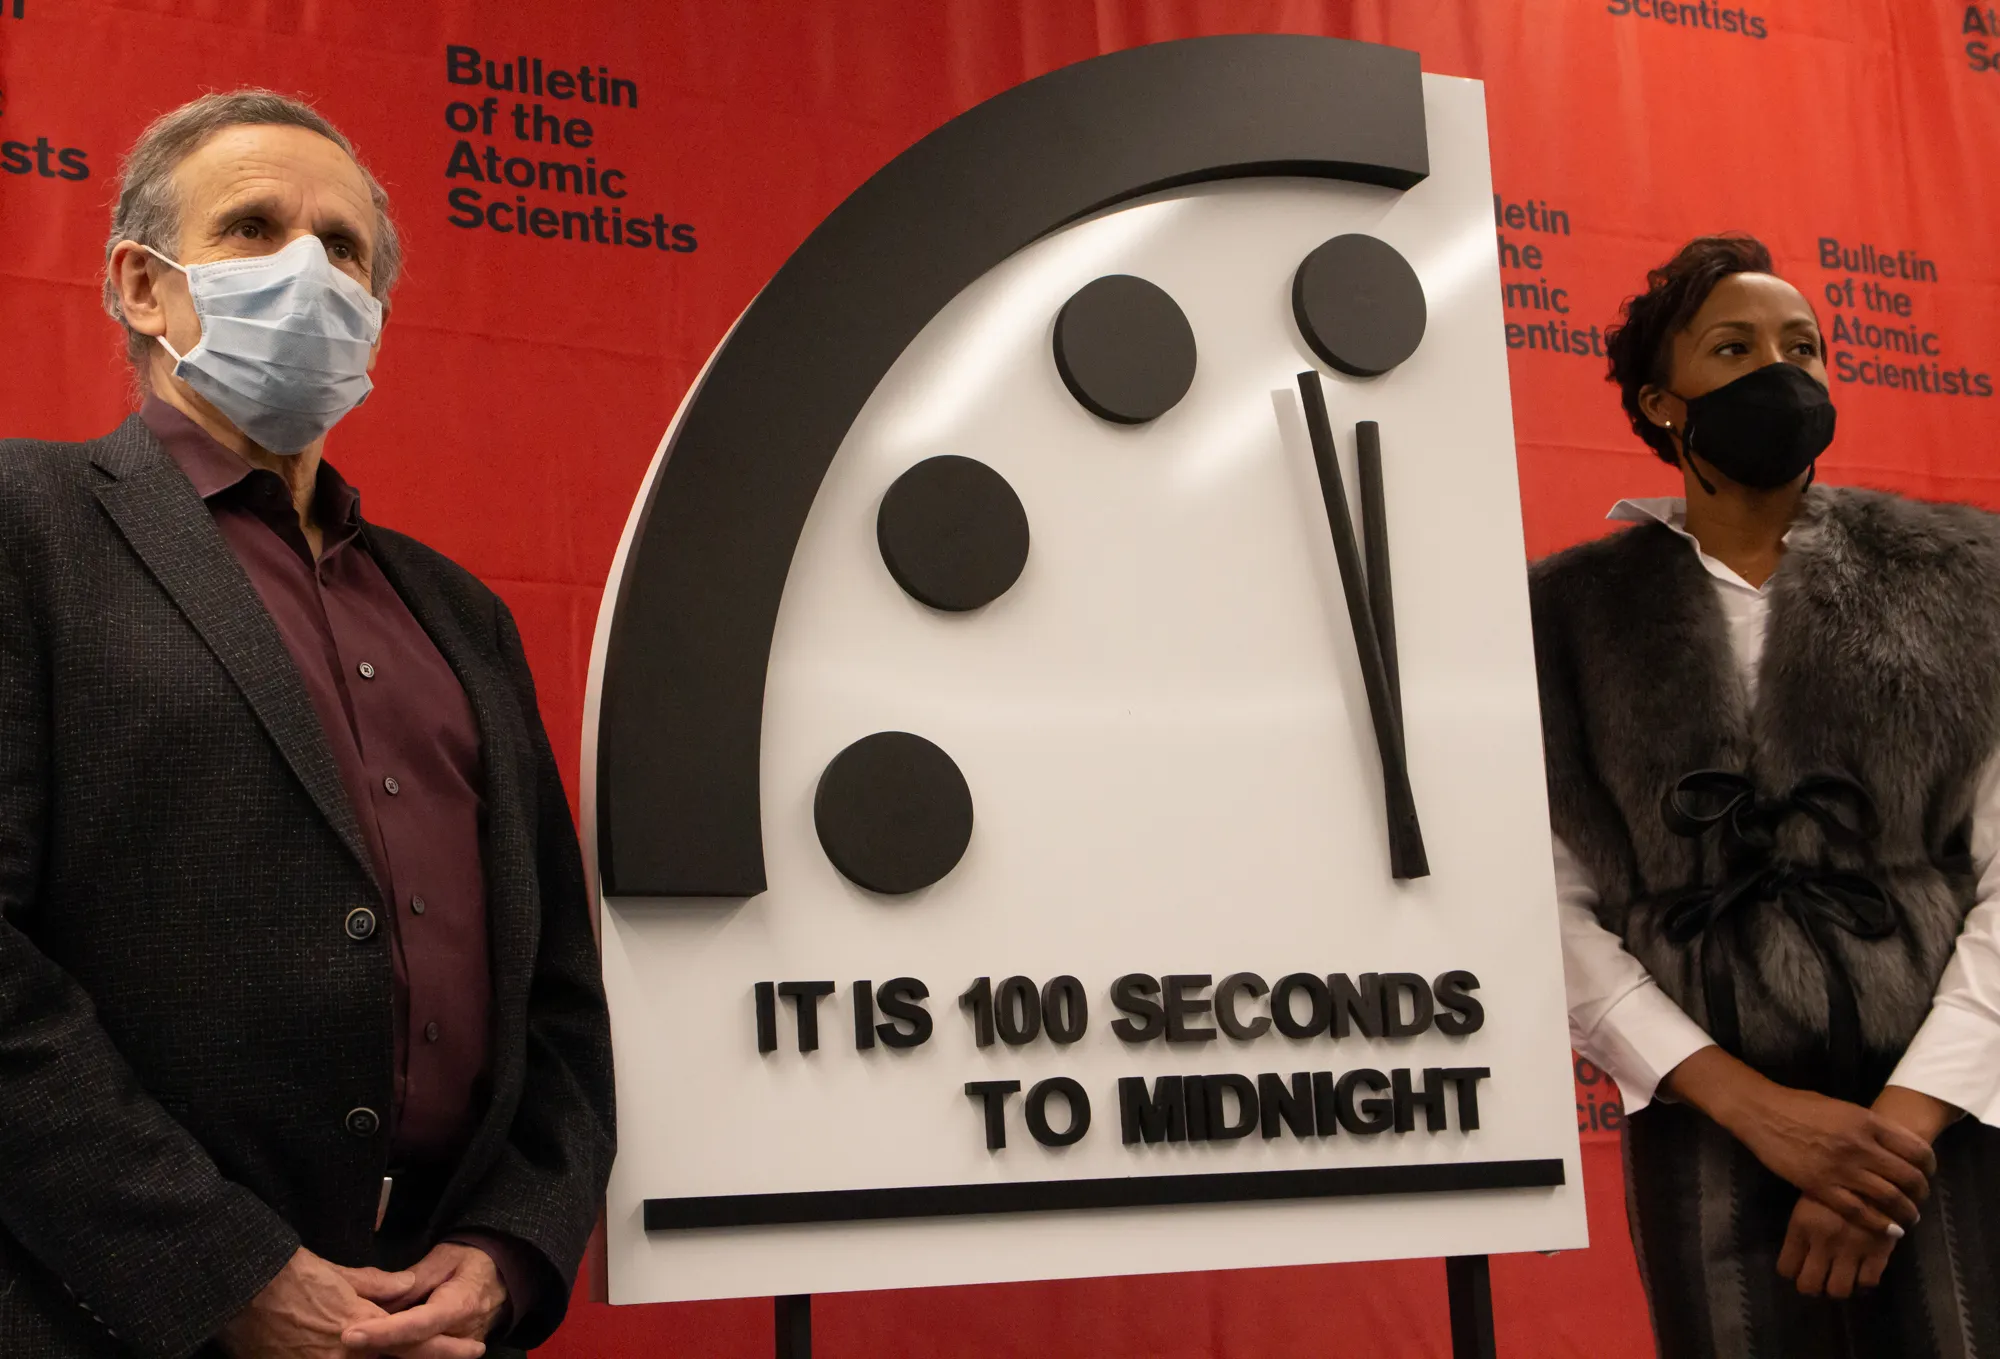 What Happens If The Doomsday Clock Hits Midnight